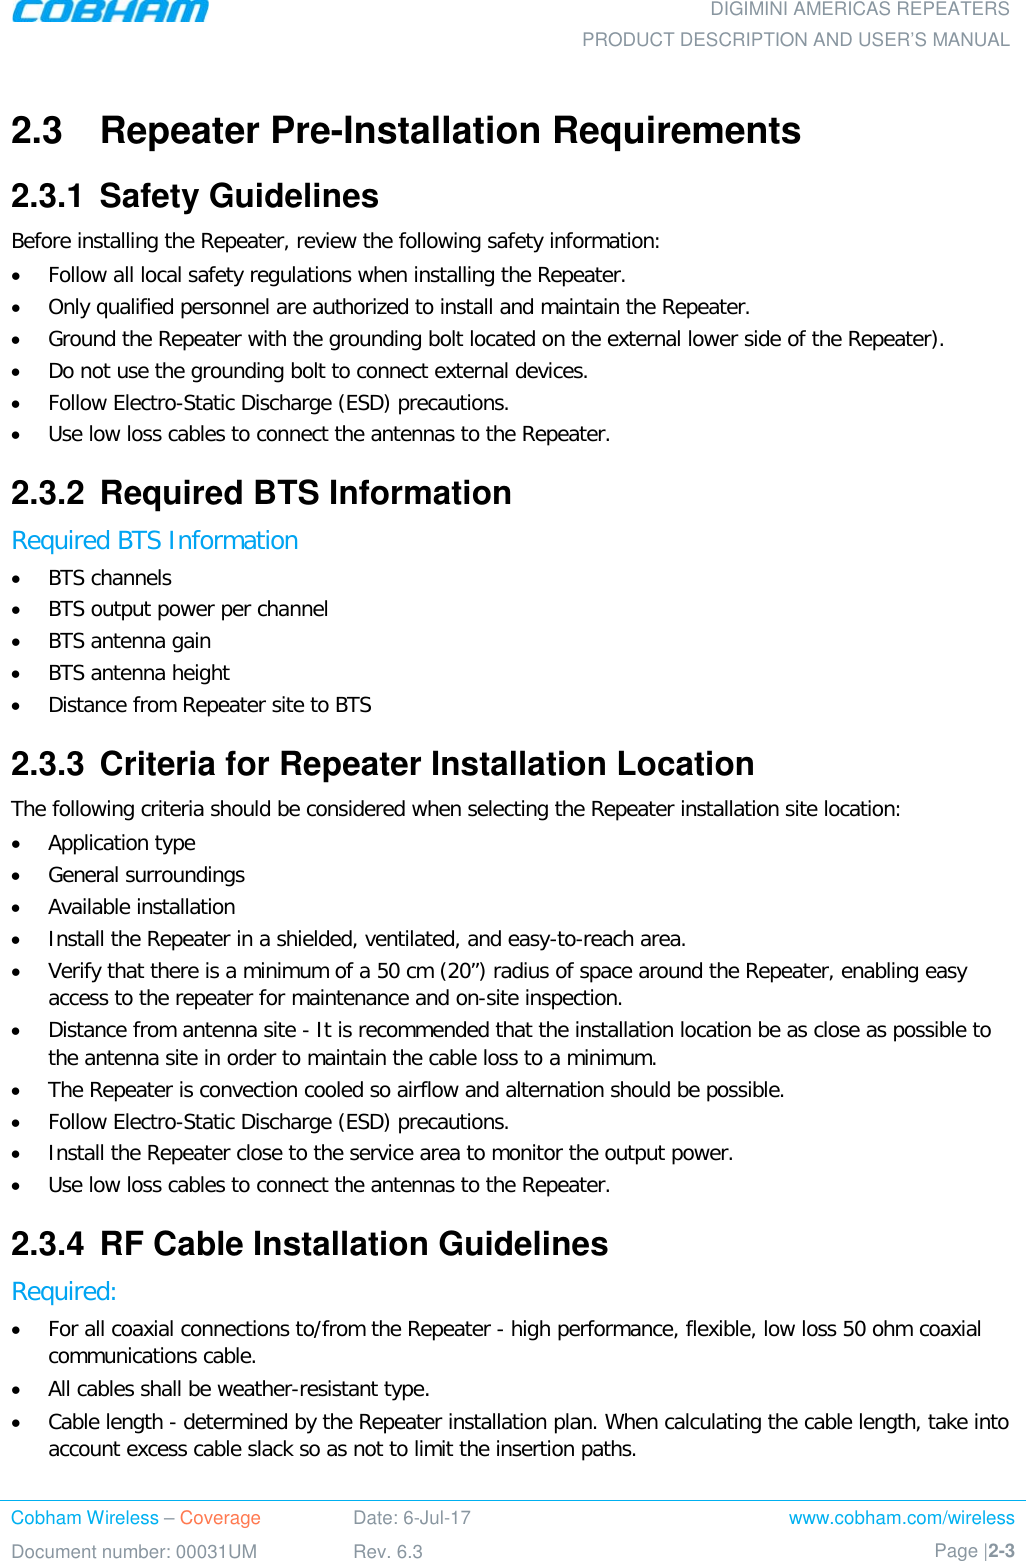  DIGIMINI AMERICAS REPEATERS PRODUCT DESCRIPTION AND USER’S MANUAL Cobham Wireless – Coverage Date: 6-Jul-17 www.cobham.com/wireless Document number: 00031UM Rev. 6.3 Page |2-3  2.3  Repeater Pre-Installation Requirements 2.3.1  Safety Guidelines Before installing the Repeater, review the following safety information:  • Follow all local safety regulations when installing the Repeater. • Only qualified personnel are authorized to install and maintain the Repeater. • Ground the Repeater with the grounding bolt located on the external lower side of the Repeater). • Do not use the grounding bolt to connect external devices. • Follow Electro-Static Discharge (ESD) precautions. • Use low loss cables to connect the antennas to the Repeater. 2.3.2  Required BTS Information Required BTS Information • BTS channels • BTS output power per channel • BTS antenna gain • BTS antenna height  • Distance from Repeater site to BTS 2.3.3  Criteria for Repeater Installation Location The following criteria should be considered when selecting the Repeater installation site location: • Application type • General surroundings • Available installation • Install the Repeater in a shielded, ventilated, and easy-to-reach area. • Verify that there is a minimum of a 50 cm (20”) radius of space around the Repeater, enabling easy access to the repeater for maintenance and on-site inspection. • Distance from antenna site - It is recommended that the installation location be as close as possible to the antenna site in order to maintain the cable loss to a minimum. • The Repeater is convection cooled so airflow and alternation should be possible. • Follow Electro-Static Discharge (ESD) precautions. • Install the Repeater close to the service area to monitor the output power. • Use low loss cables to connect the antennas to the Repeater. 2.3.4  RF Cable Installation Guidelines Required: • For all coaxial connections to/from the Repeater - high performance, flexible, low loss 50 ohm coaxial communications cable.  • All cables shall be weather-resistant type.  • Cable length - determined by the Repeater installation plan. When calculating the cable length, take into account excess cable slack so as not to limit the insertion paths.  